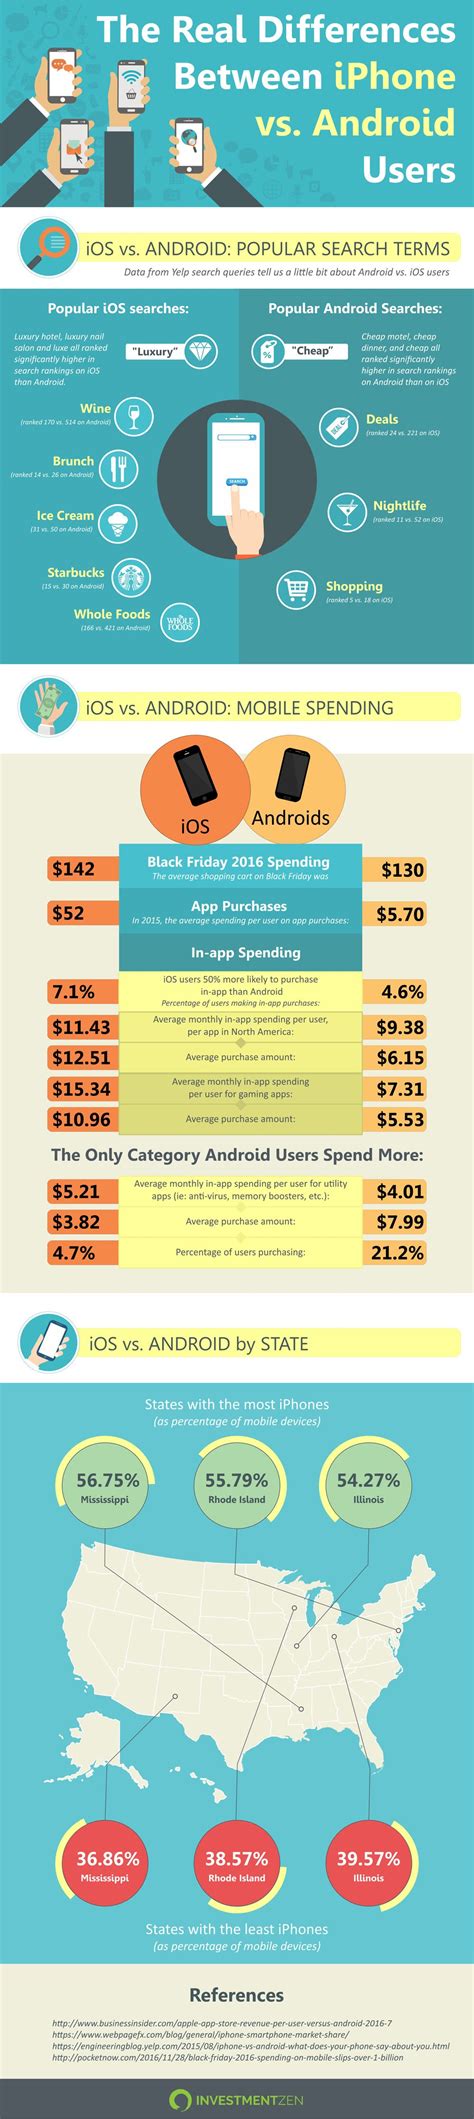 The Real Differences Between Iphone Vs Android Users Infographic